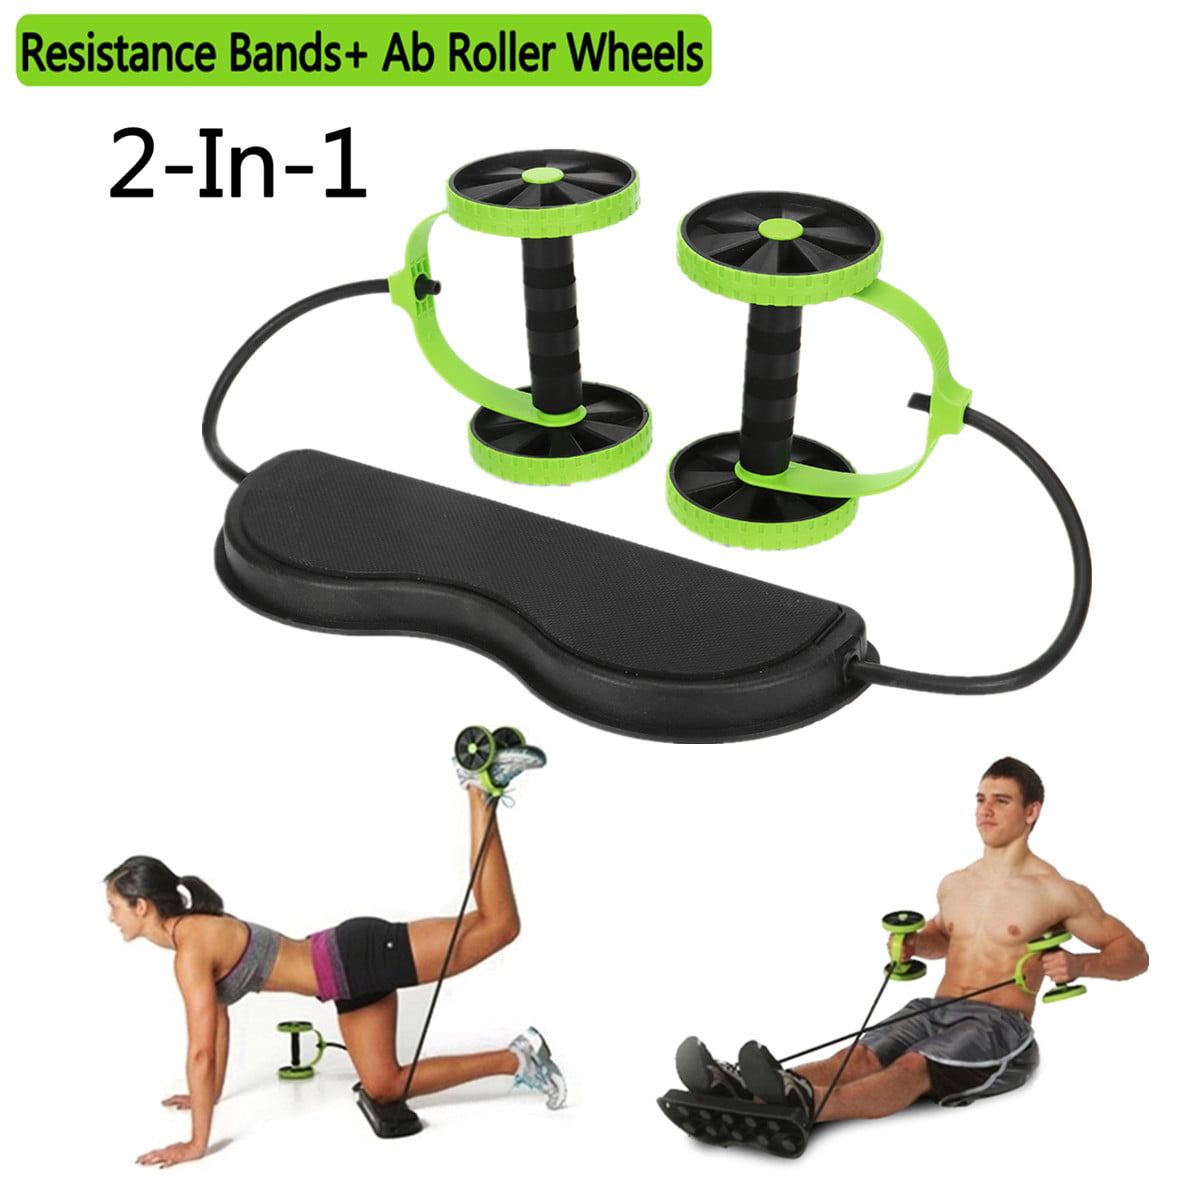 Details about   Ab Roller Wheel Abdominal Fitness Gym Exercise Equipment Core Workout Train USA 